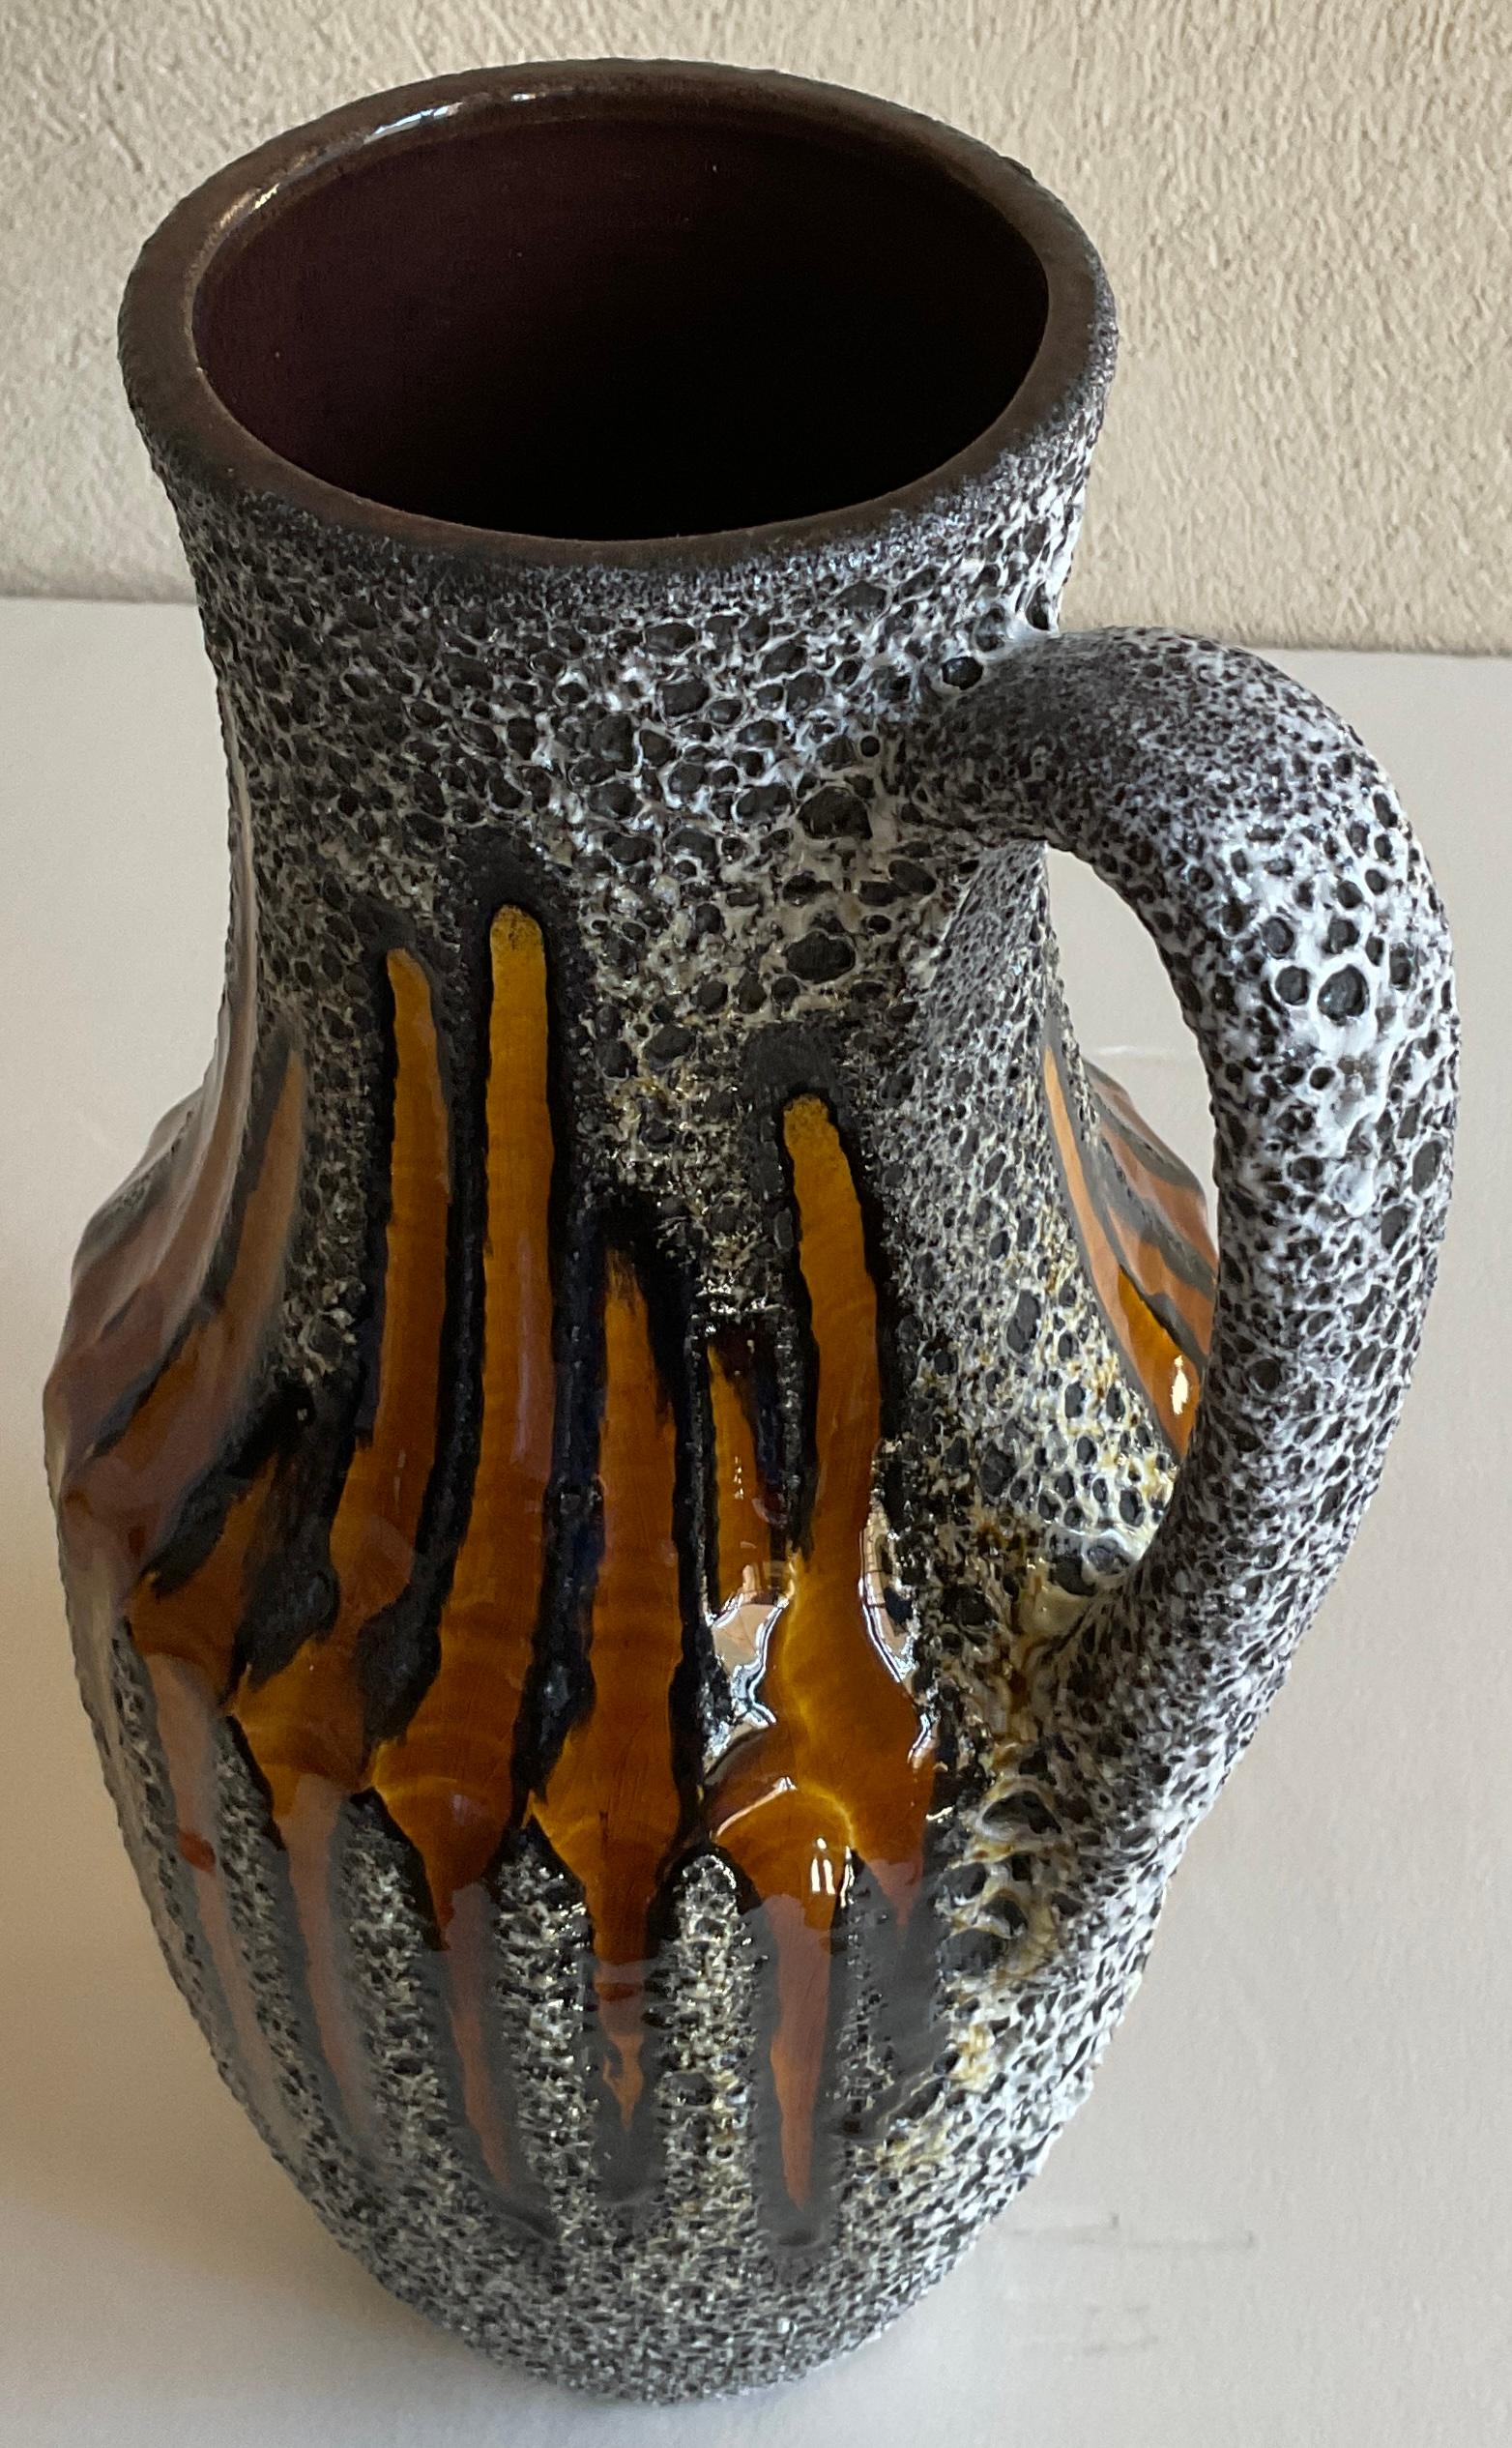 Mid-20th Century West Germany Studio Pottery Pitcher Vase In Good Condition For Sale In Miami, FL